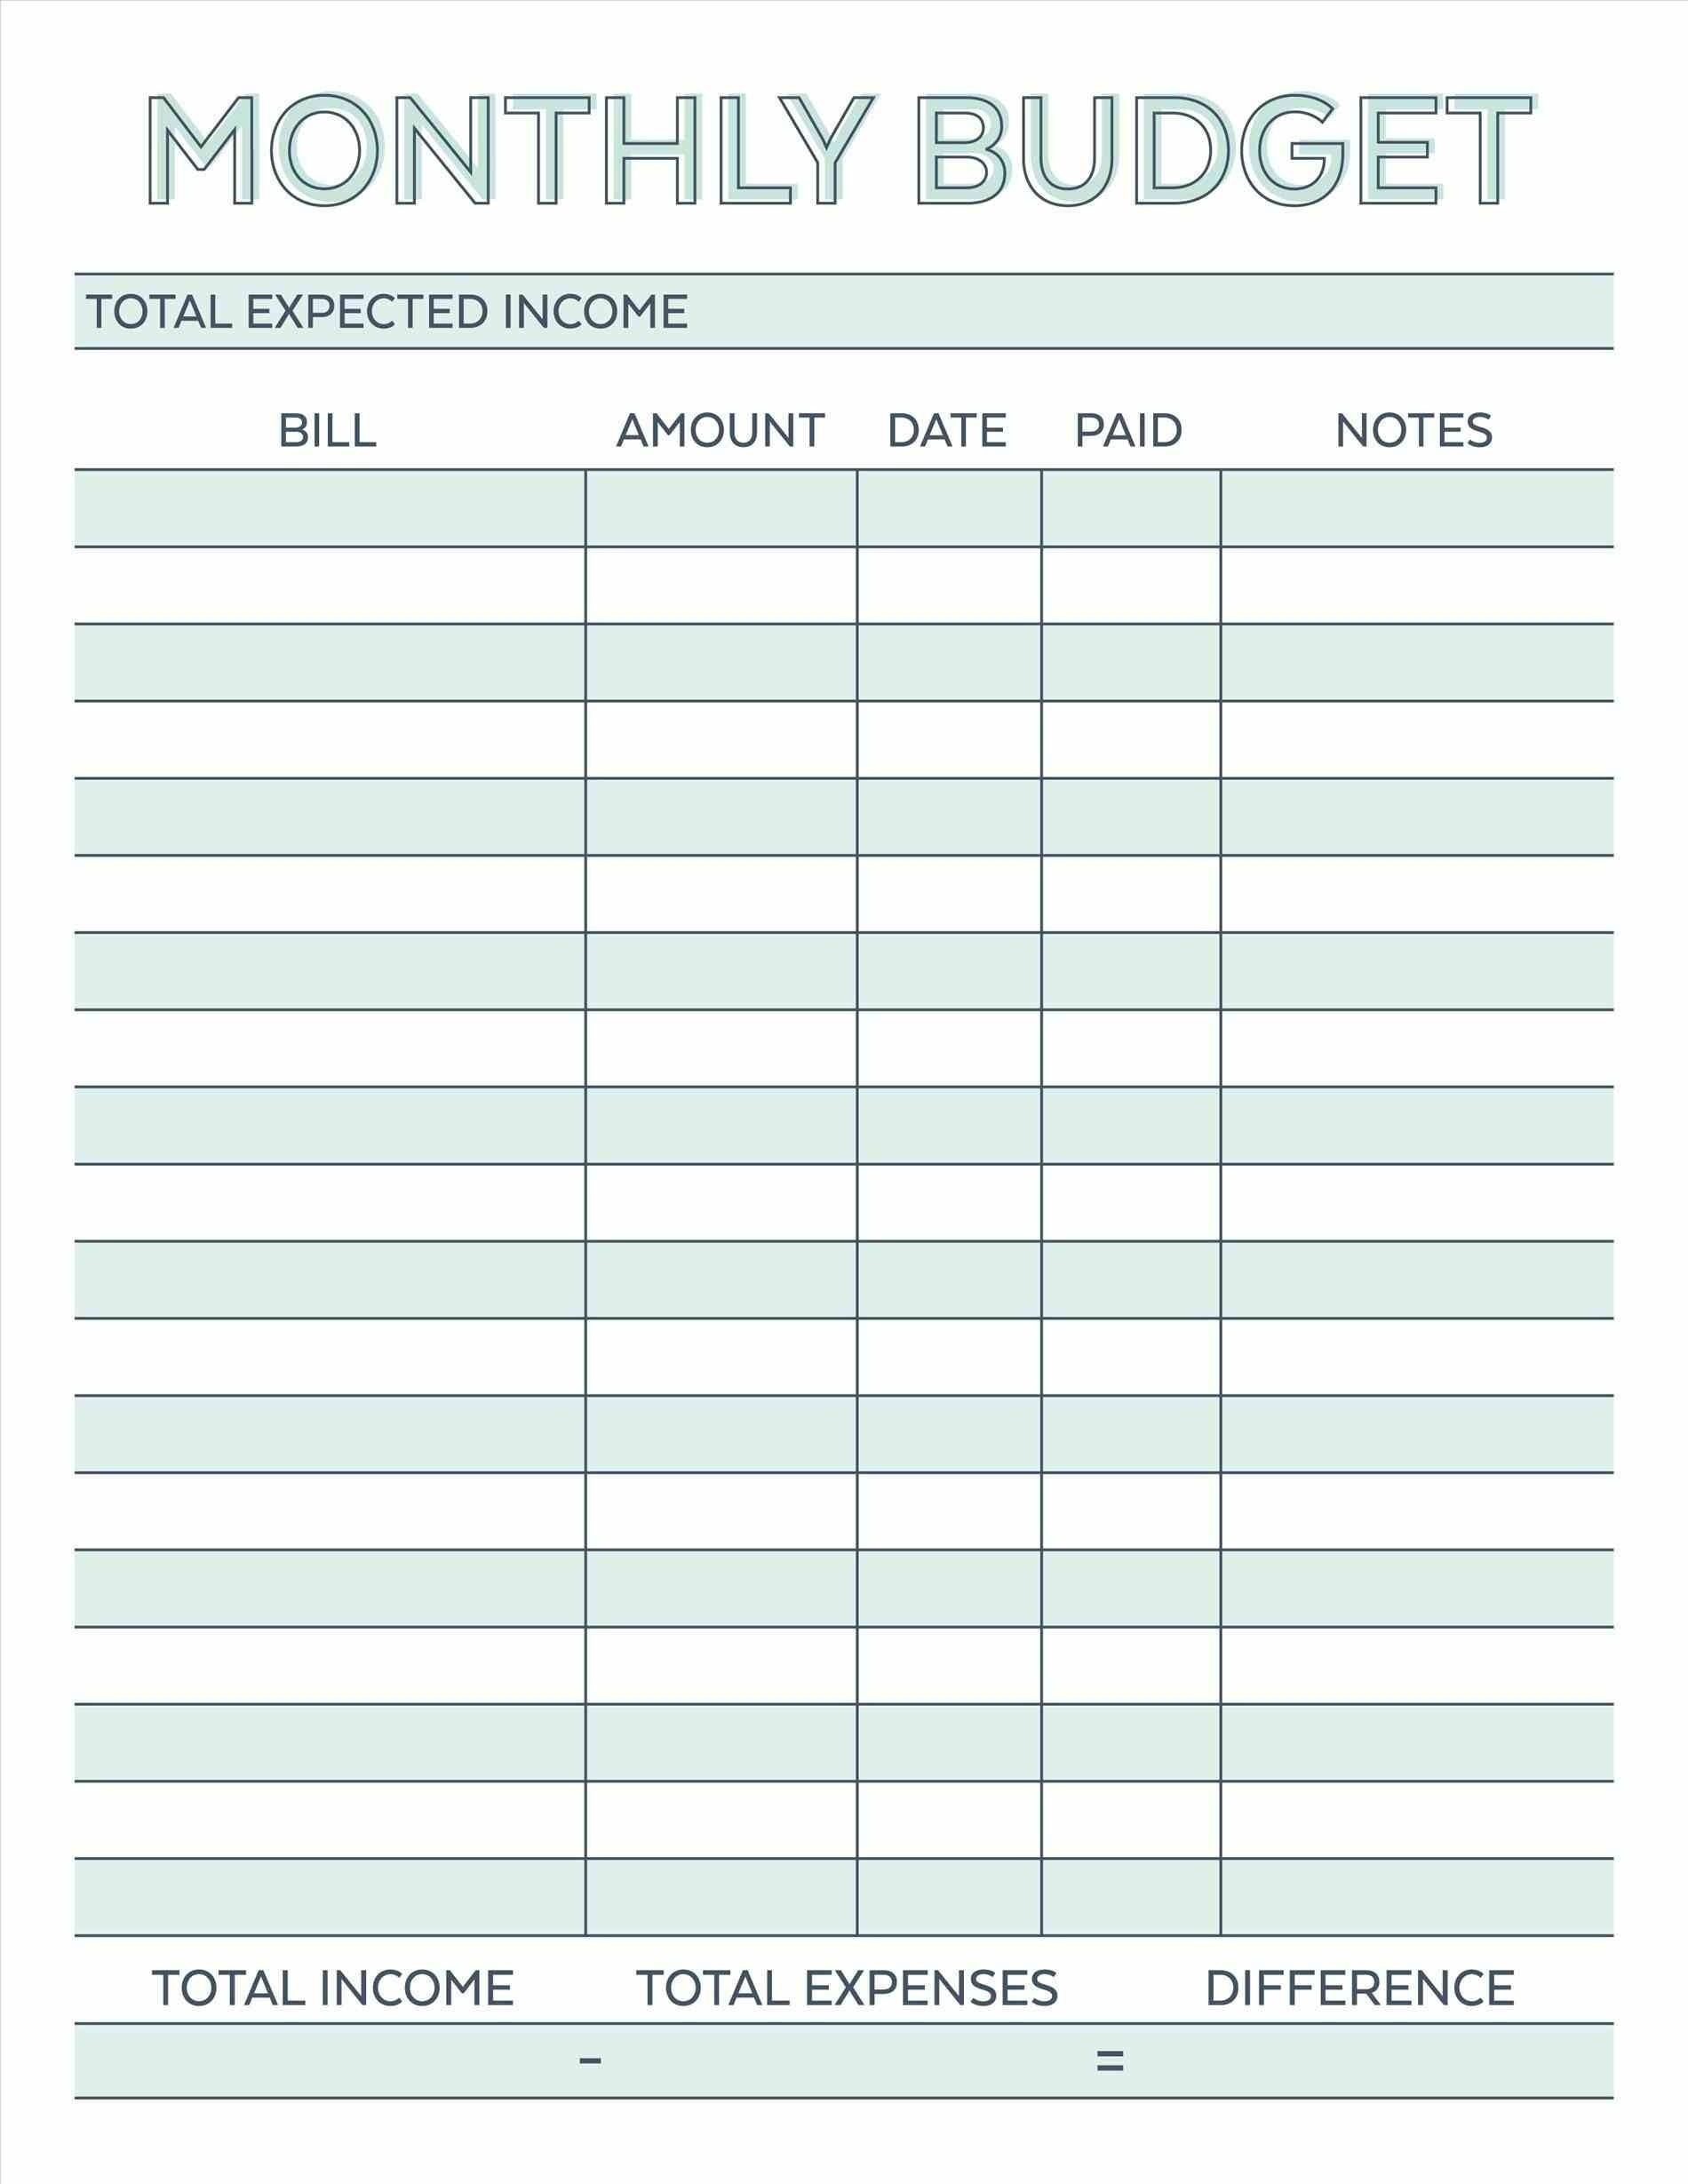 Get Blank Monthly Bill Organizer Printable ⋆ The Best Printable - Free Printable Weekly Bill Organizer